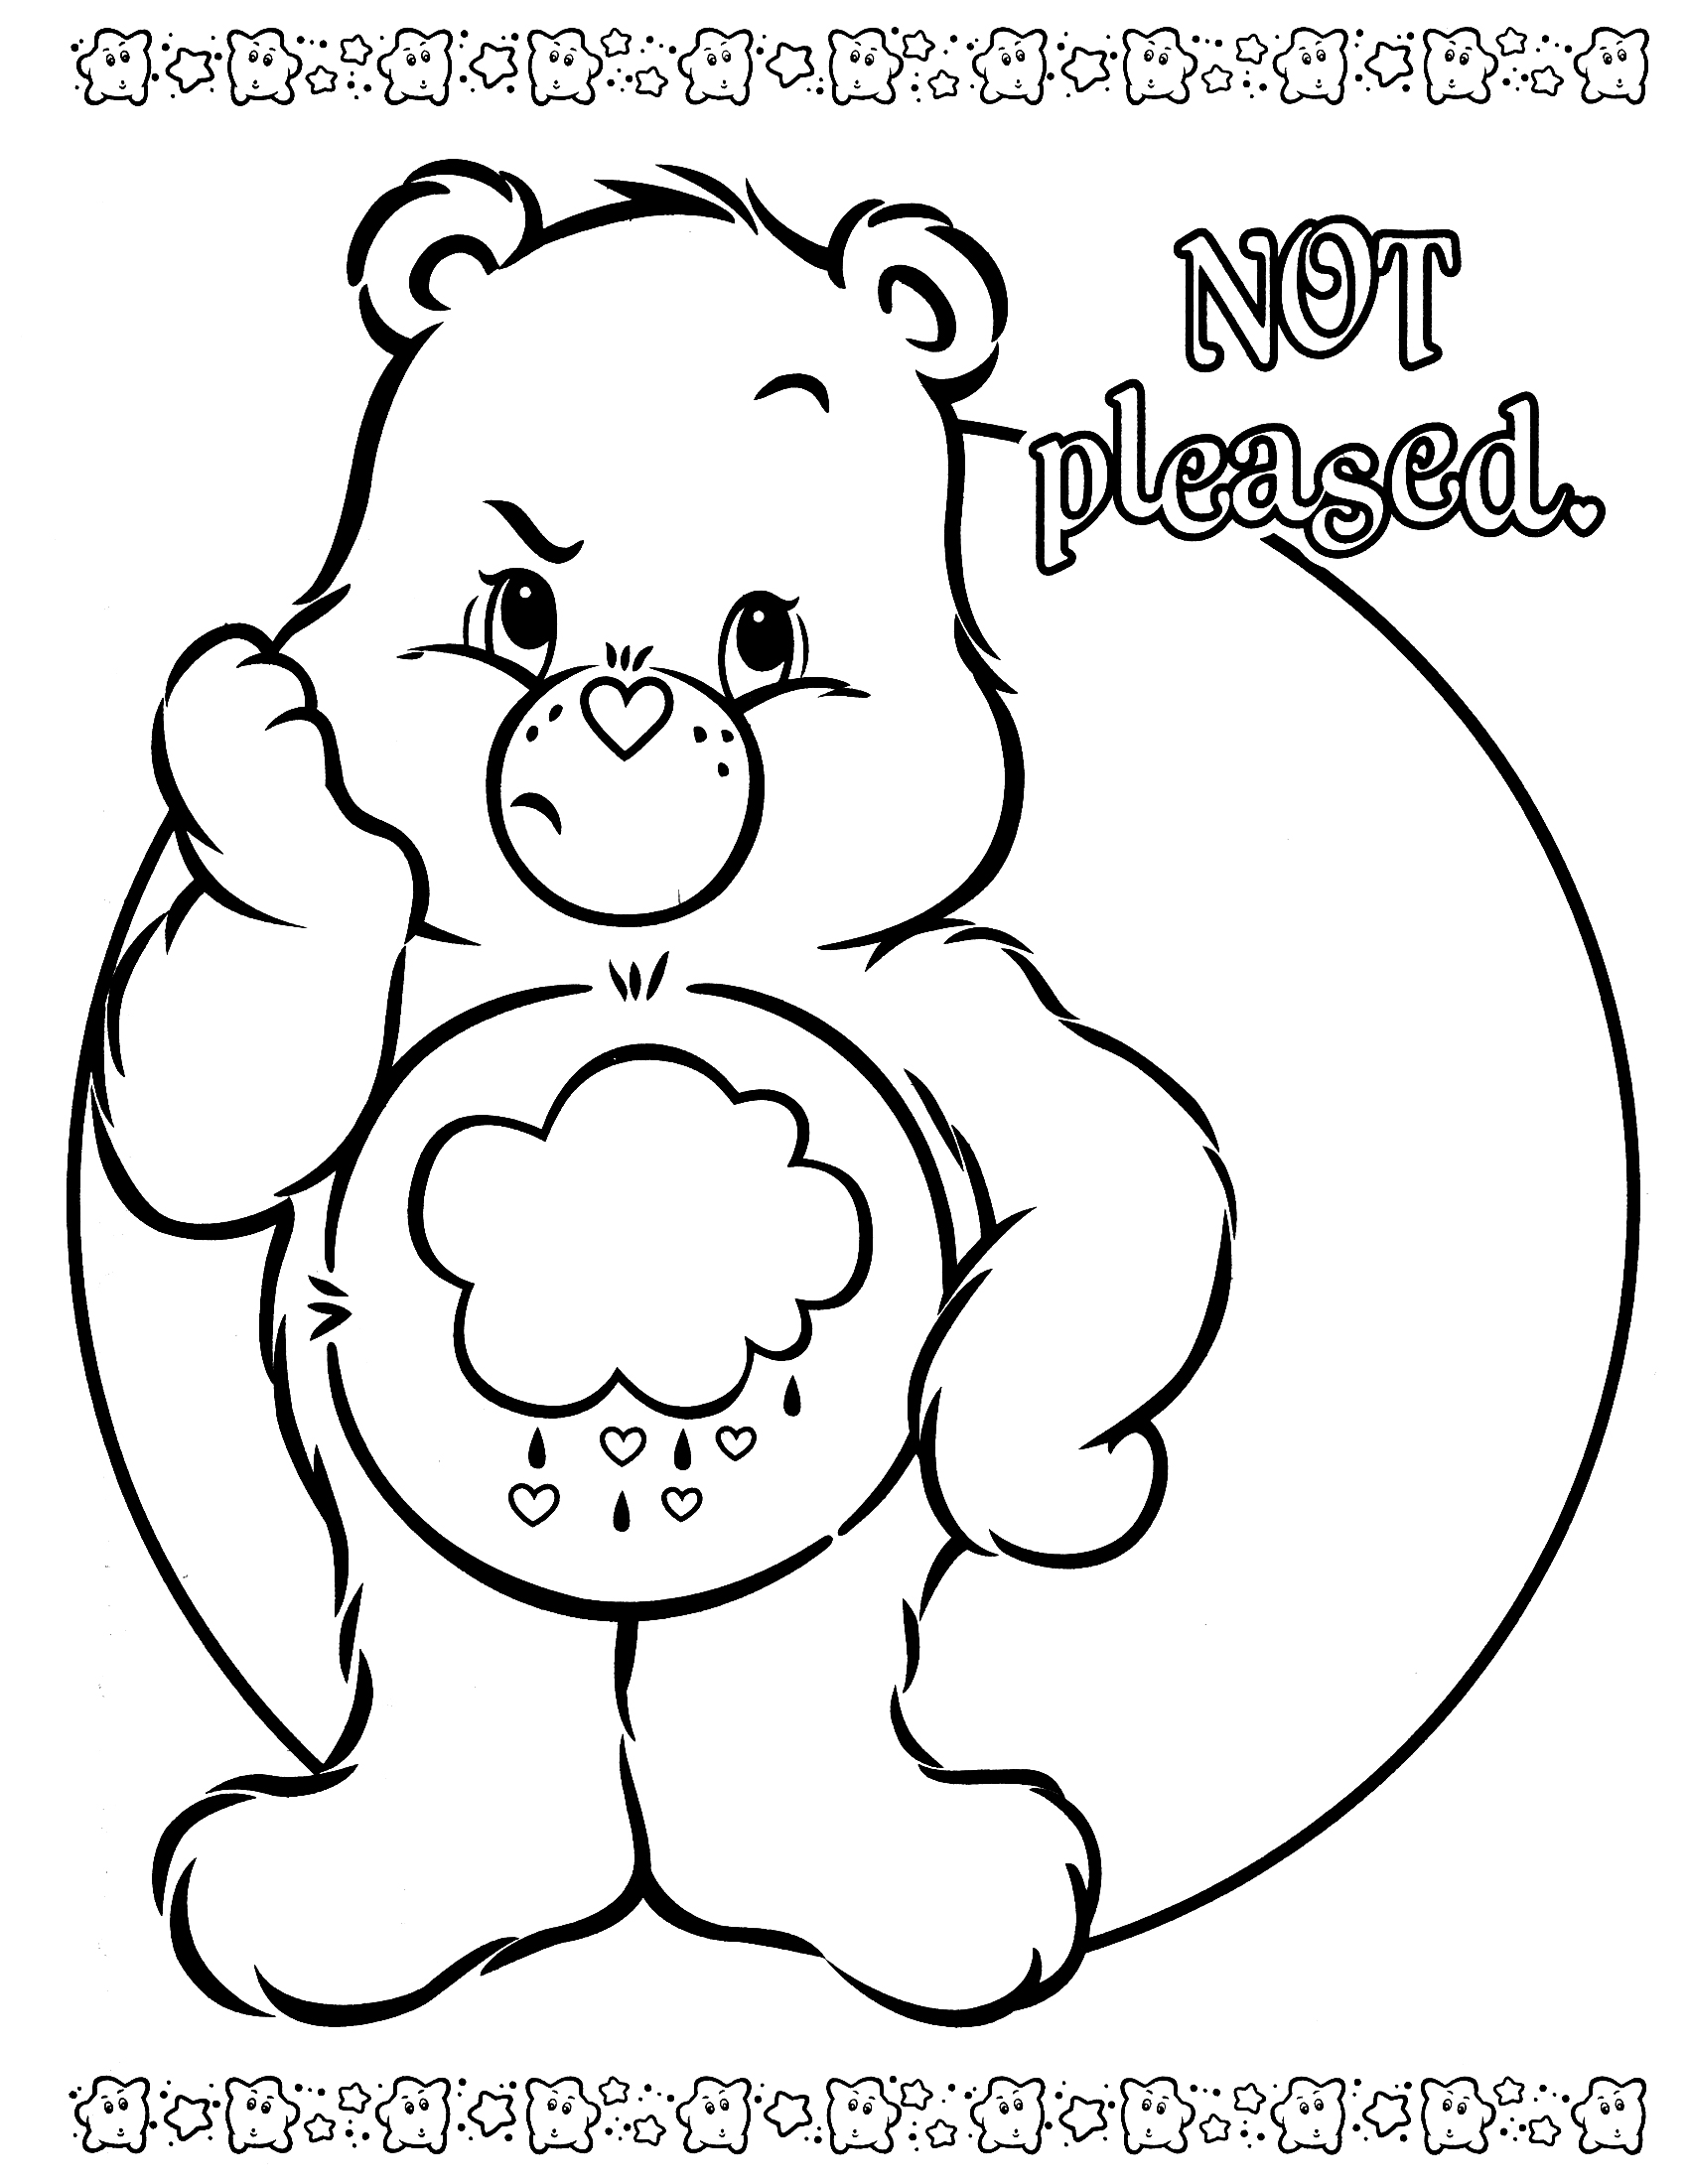 Download Care Bears #37142 (Cartoons) - Printable coloring pages